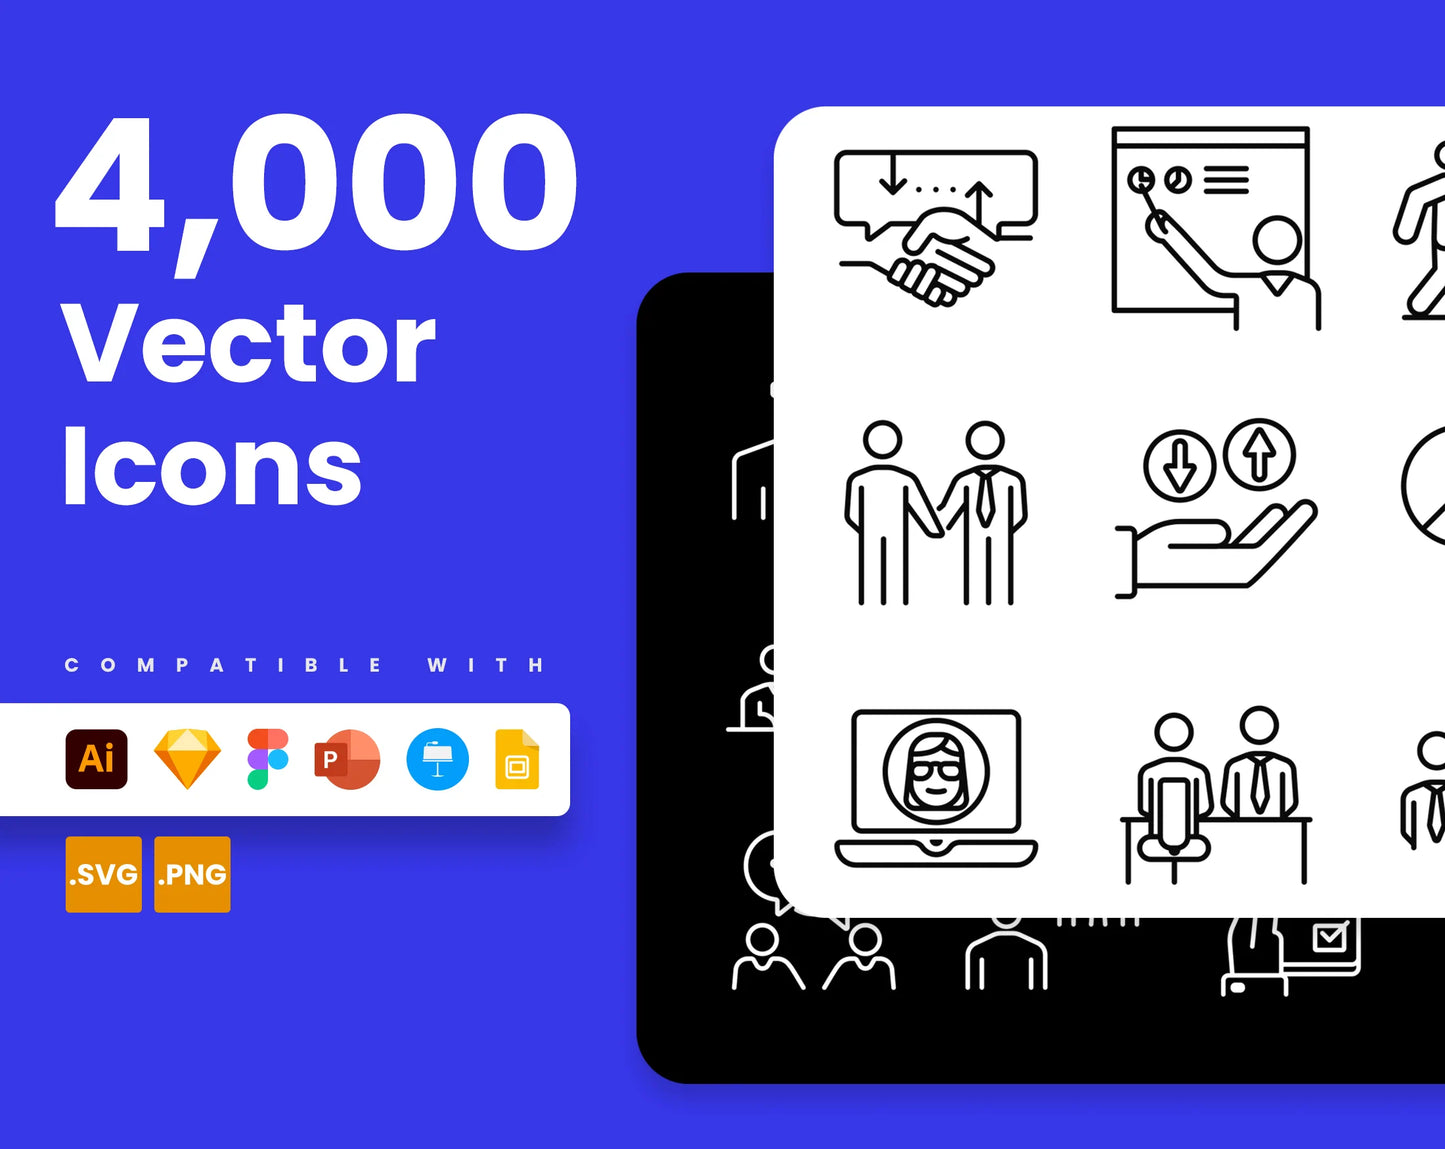 4000 Vector Icons PowerPoint slides